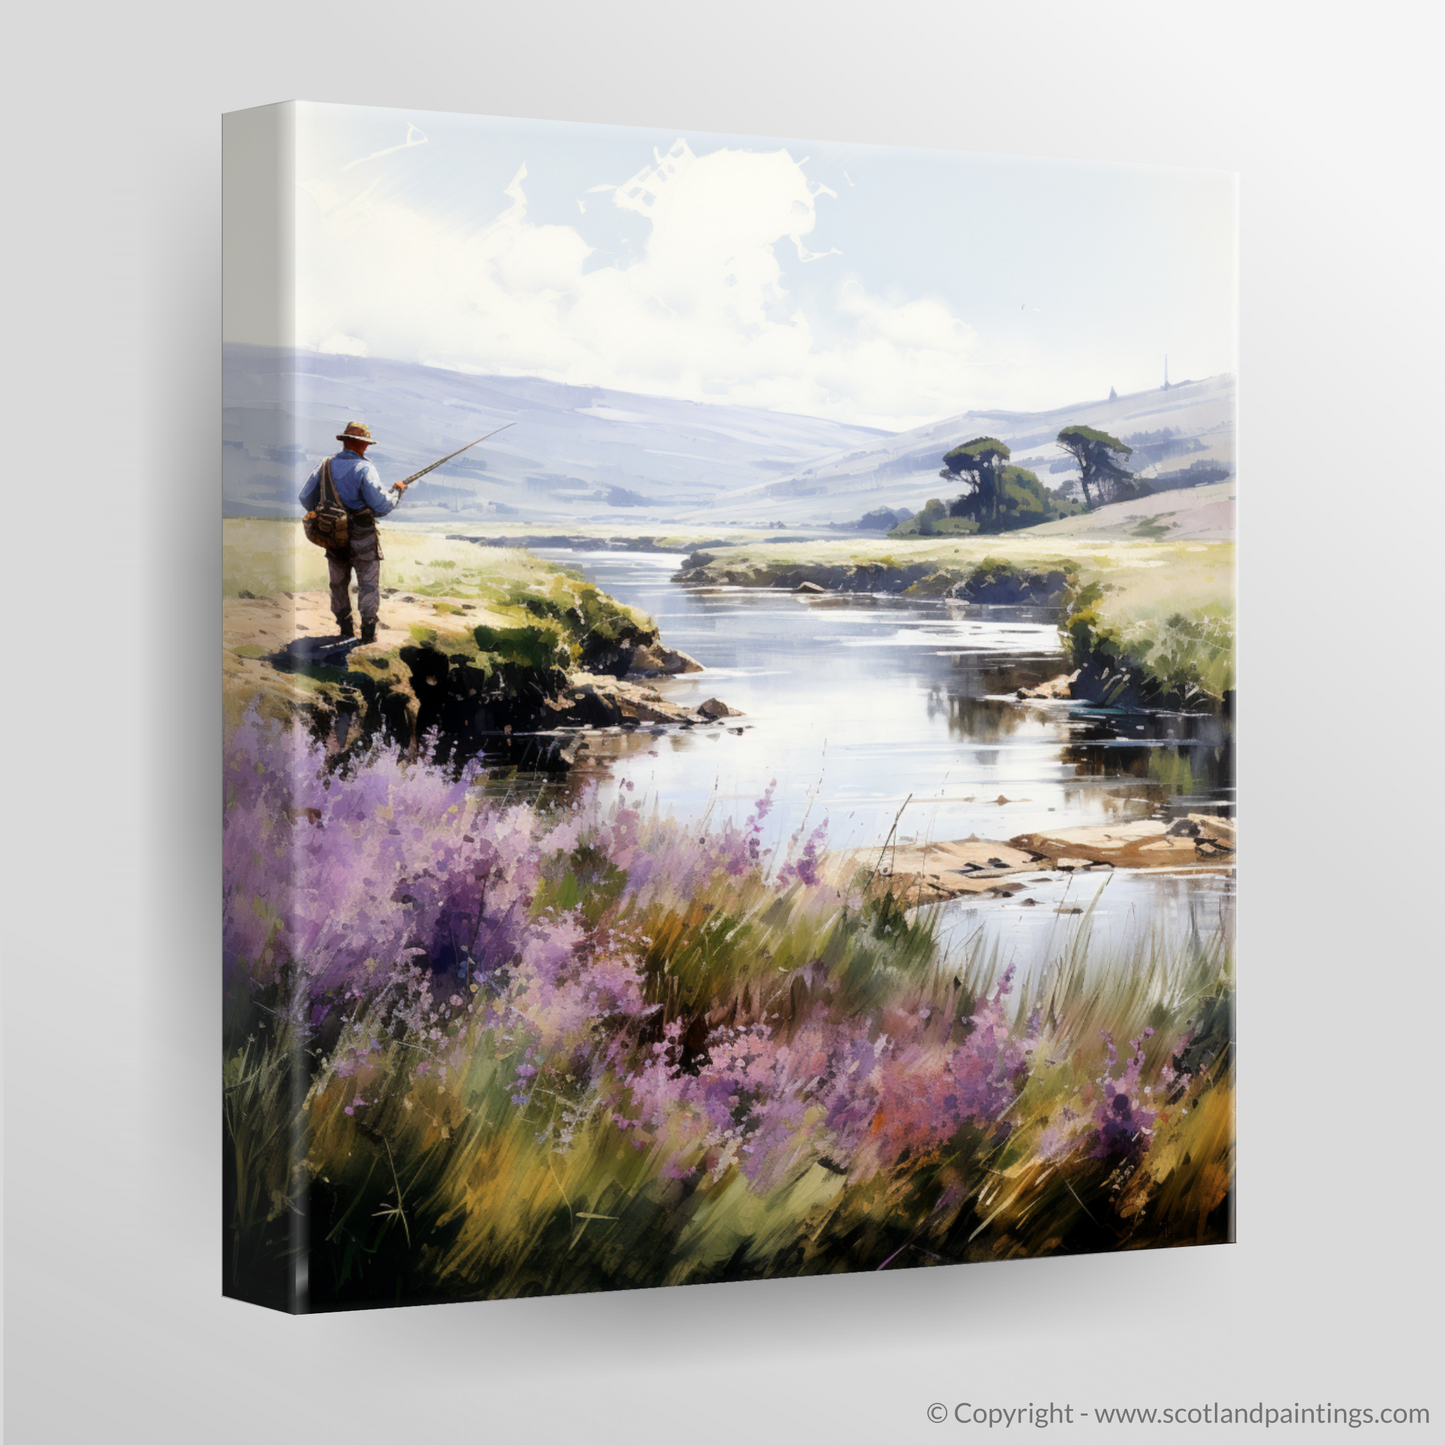 Highland Serenity: A Fly Fisher's Dance by the River Conon